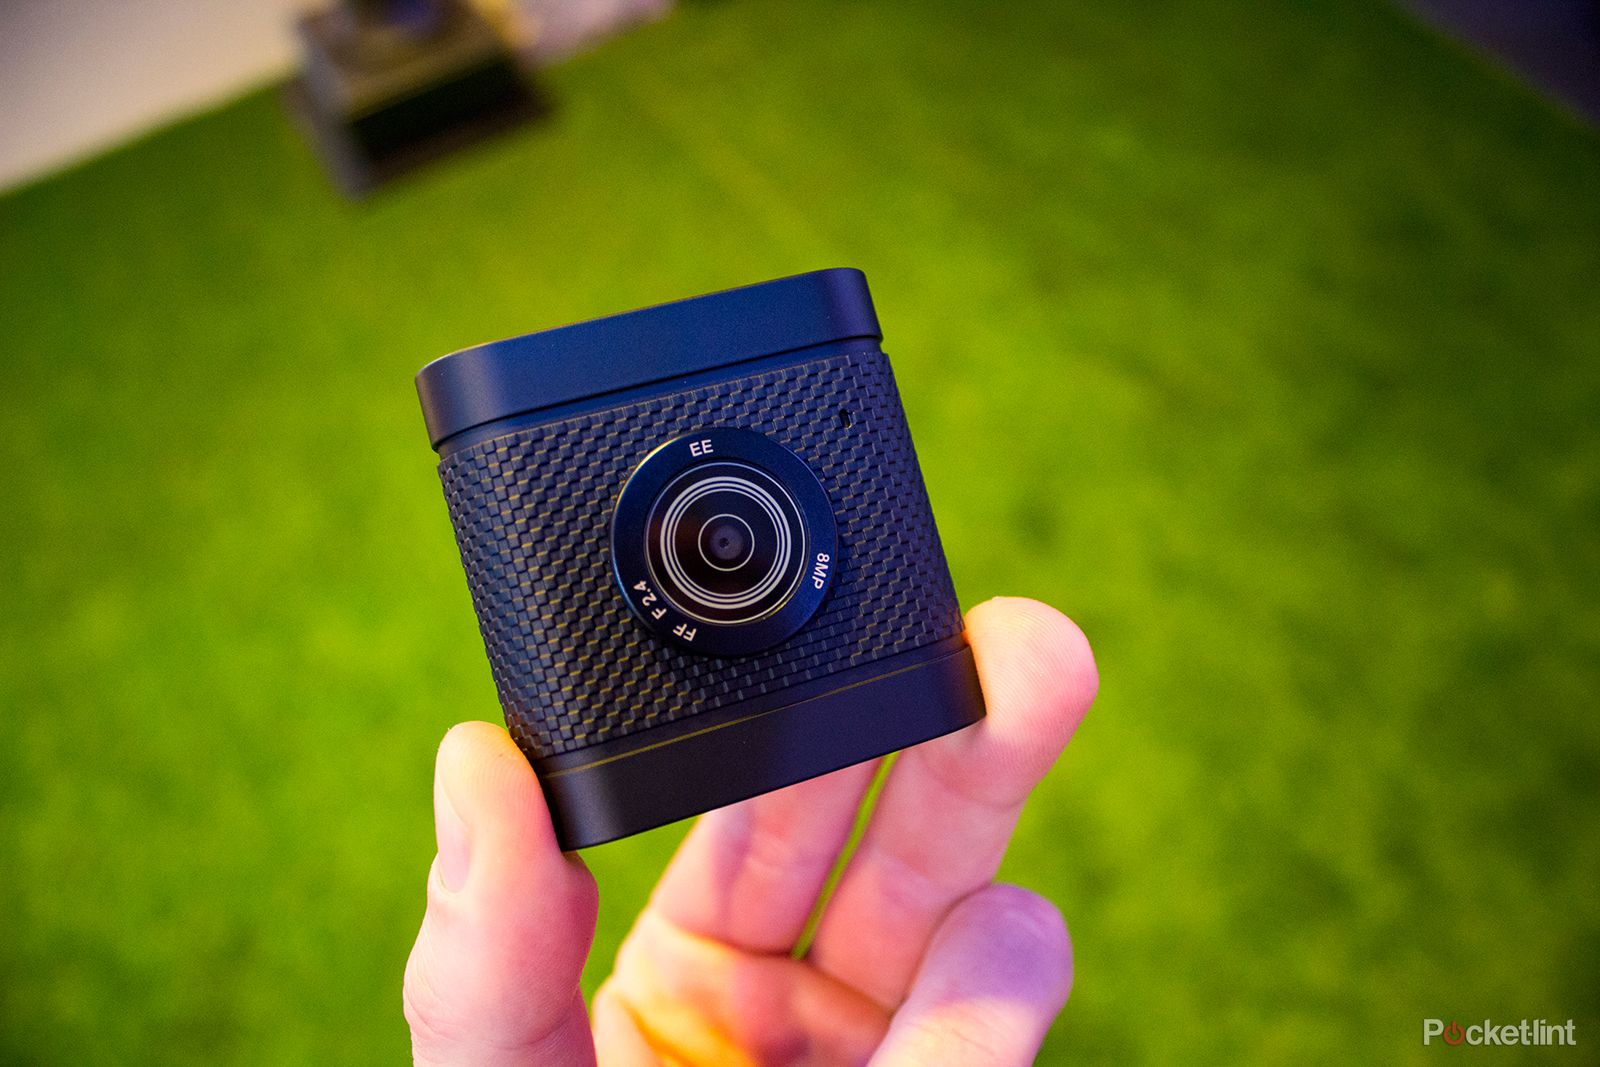 ee launches 4gee capture cam for affordable live hd video streamed anywhere image 1